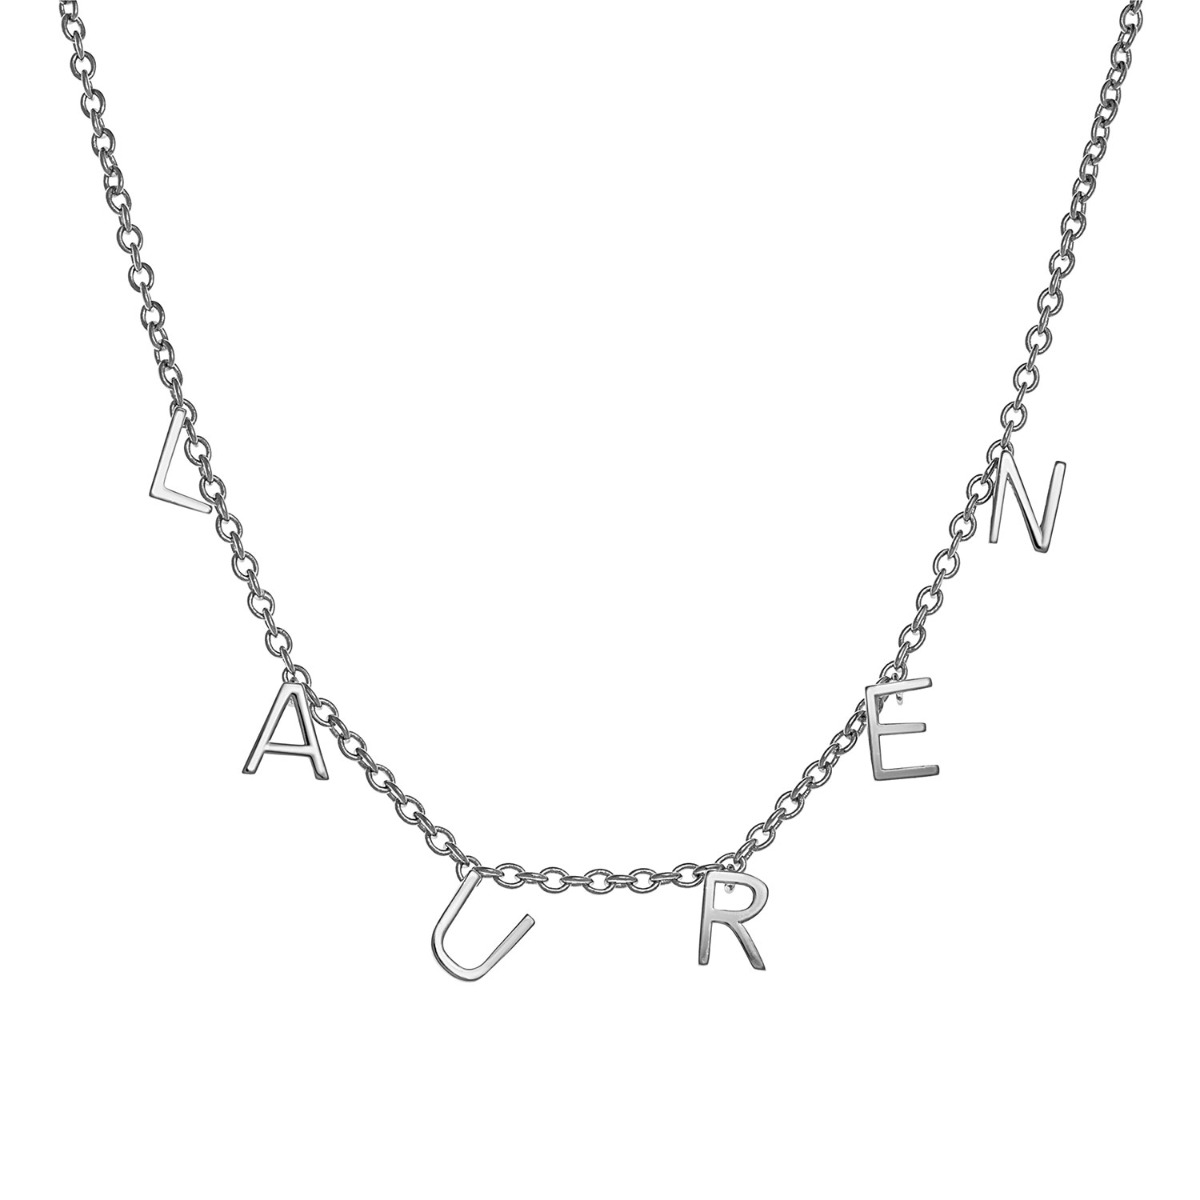 Silver plated dainty name choker